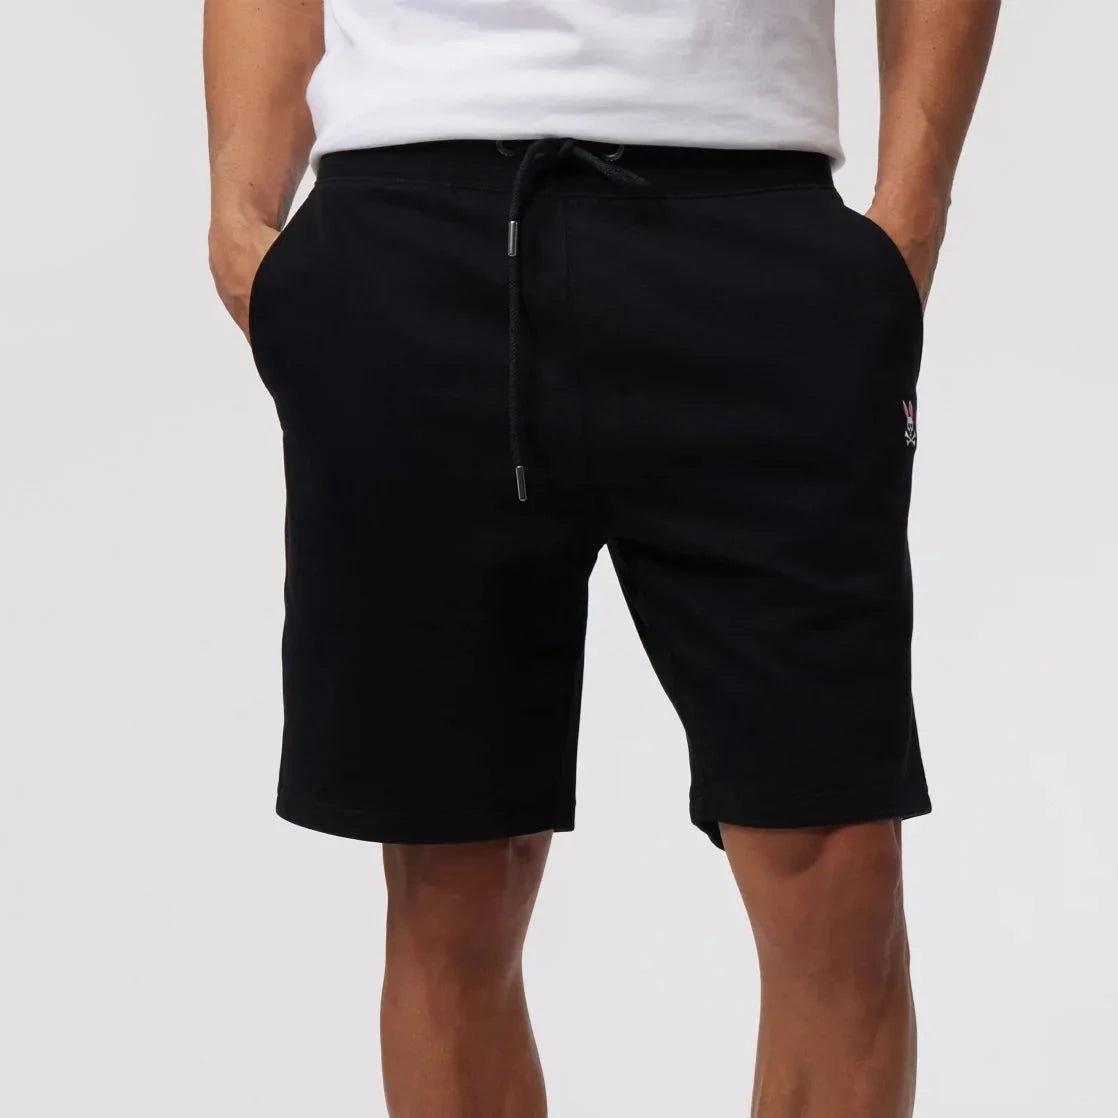 French Terry Short: Black